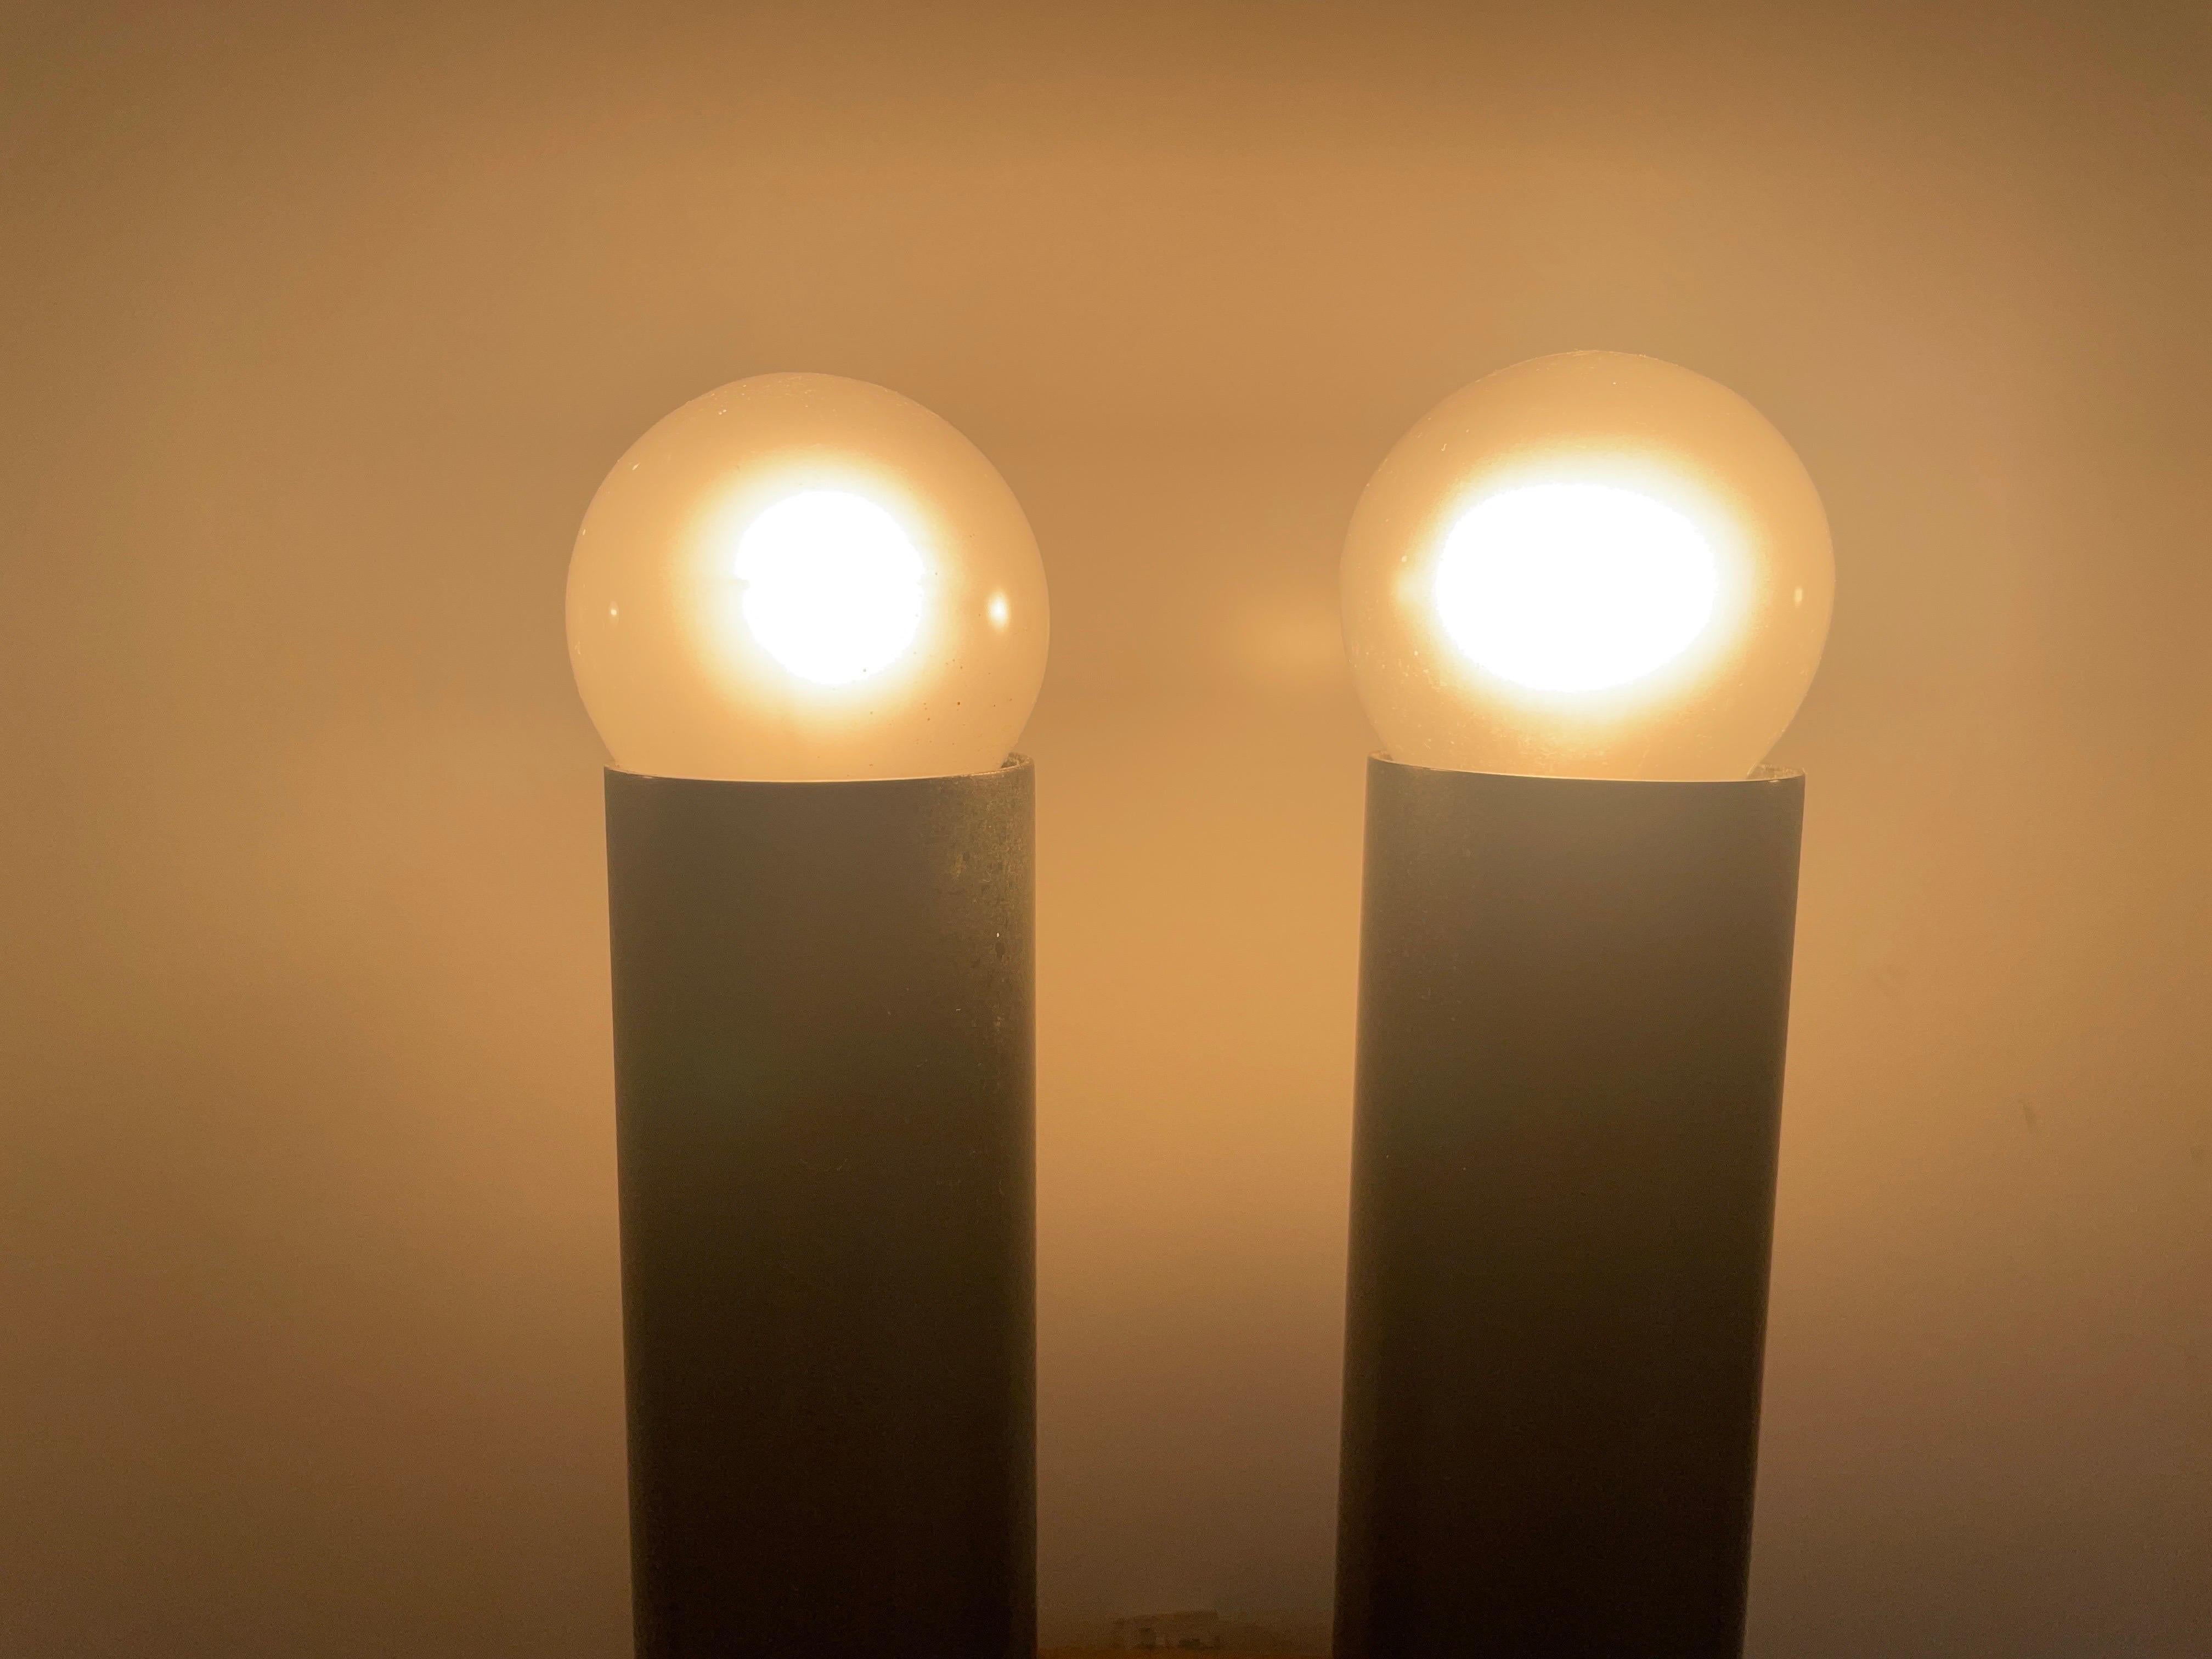 Set of 3 Modernist Tube Design Wall Sconces, 1960s, Italy For Sale 7